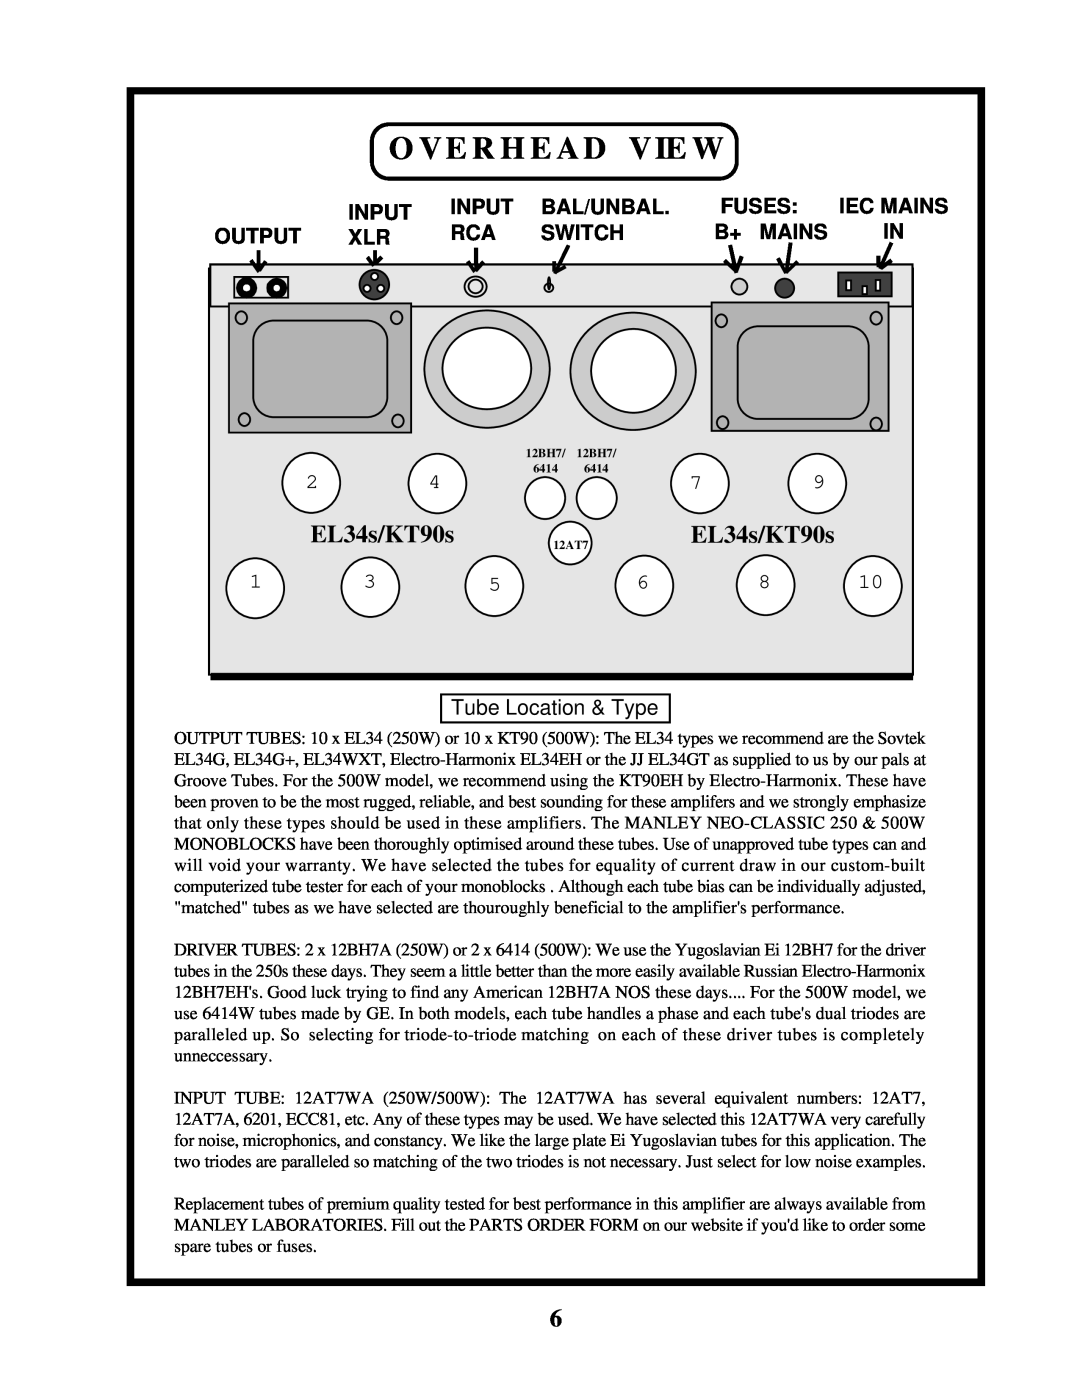 Manley Labs AMPLIFIERS owner manual Overhead View, Input, Bal/Unbal, Fuses, Iec Mains, Output, Switch, B+ Mains 